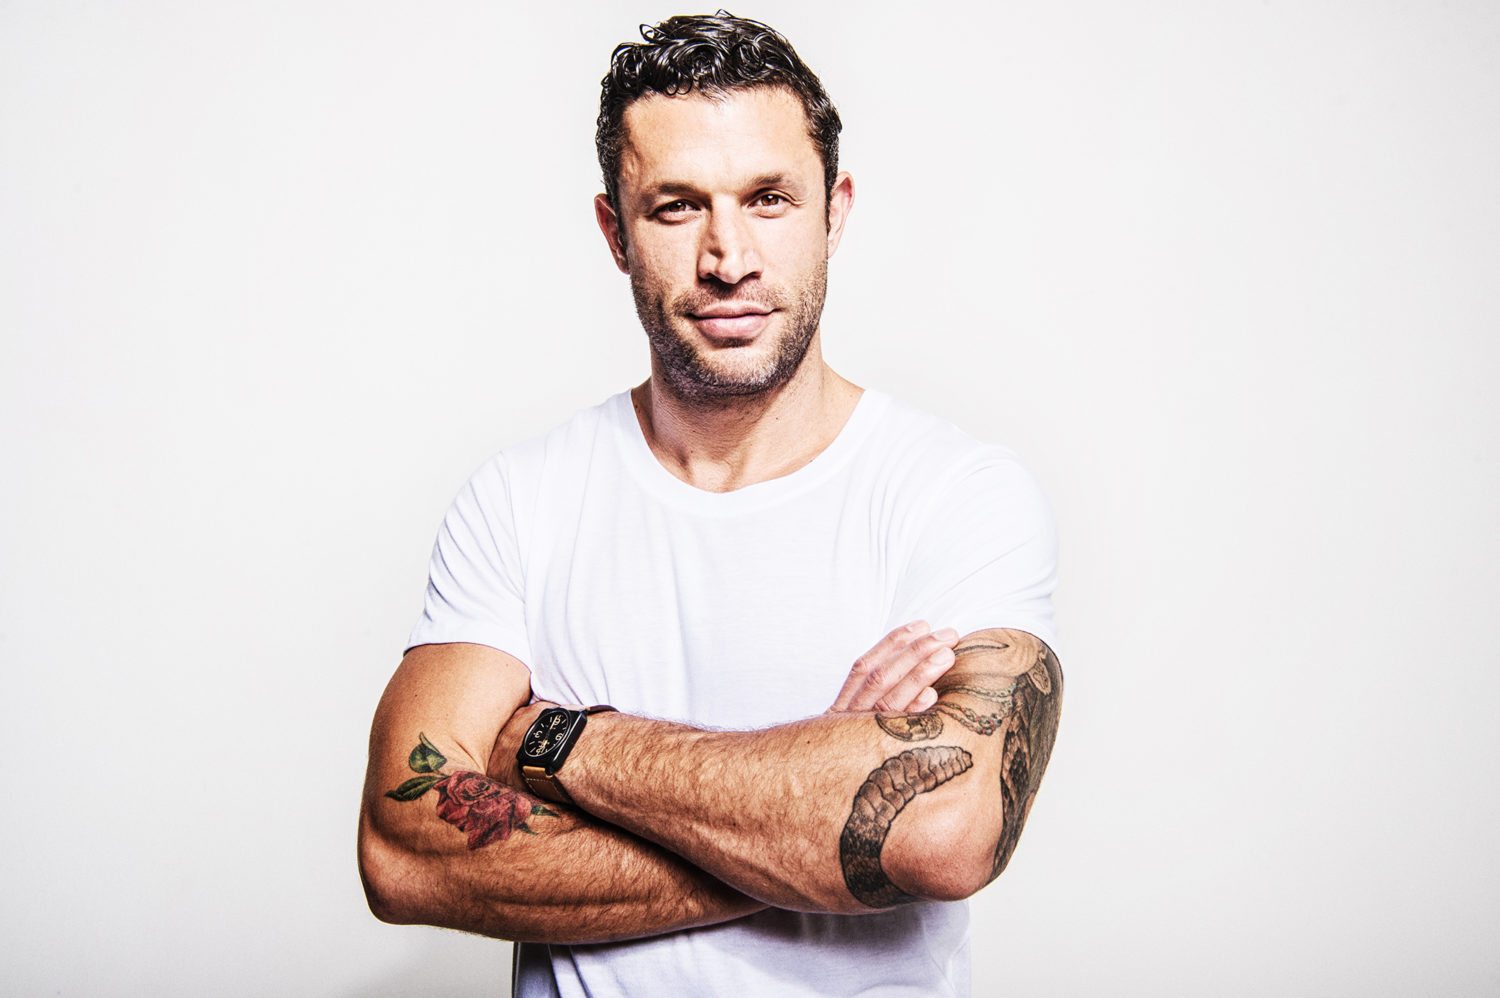 Enjoy Some Cannabis And Let Aubrey Marcus Help You Take Control Of Your Life